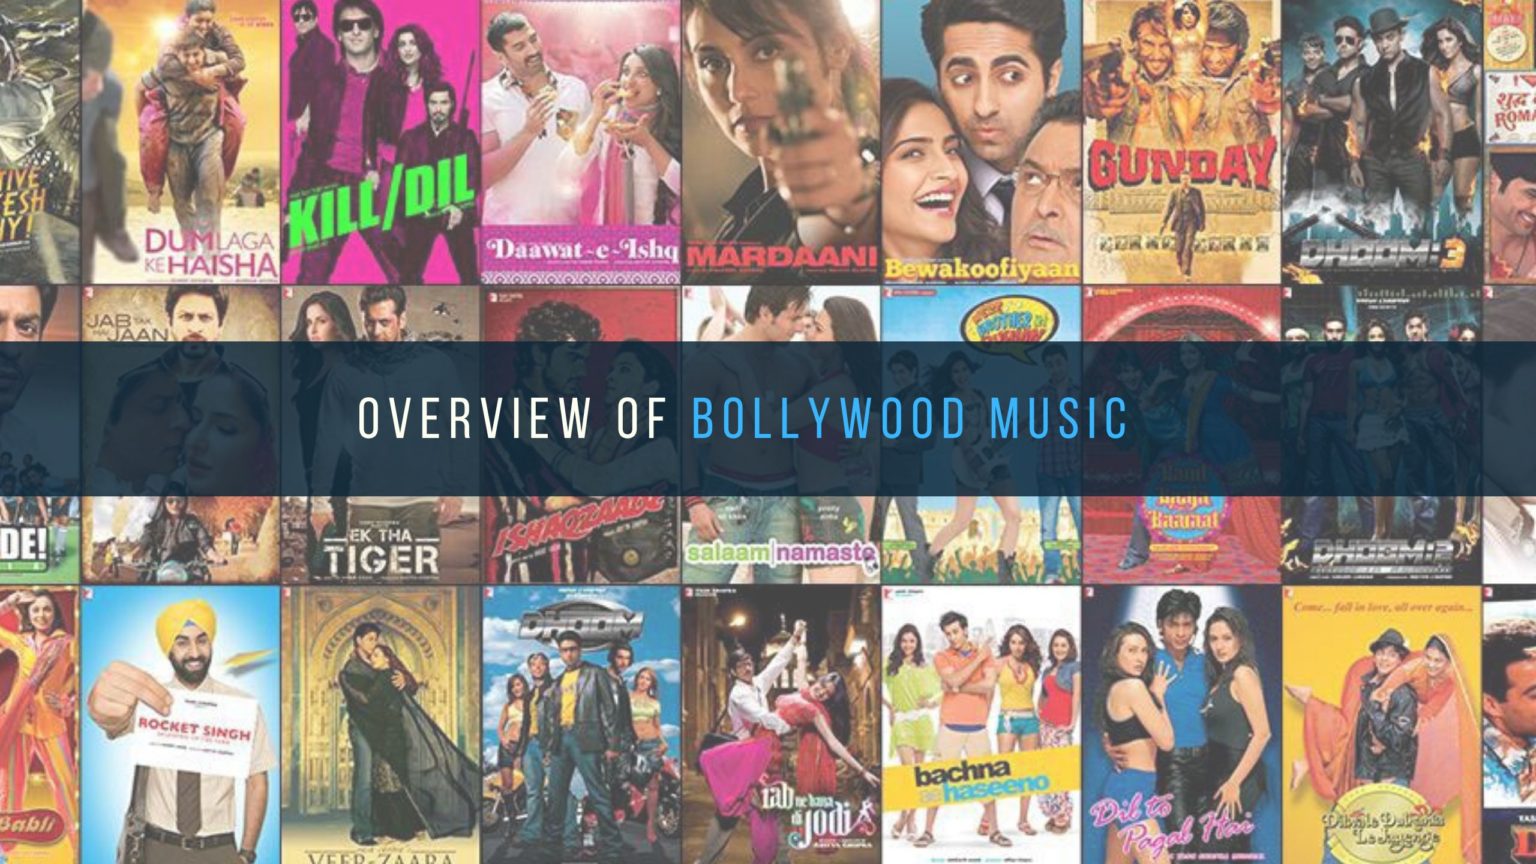 Overview of Bollywood Music